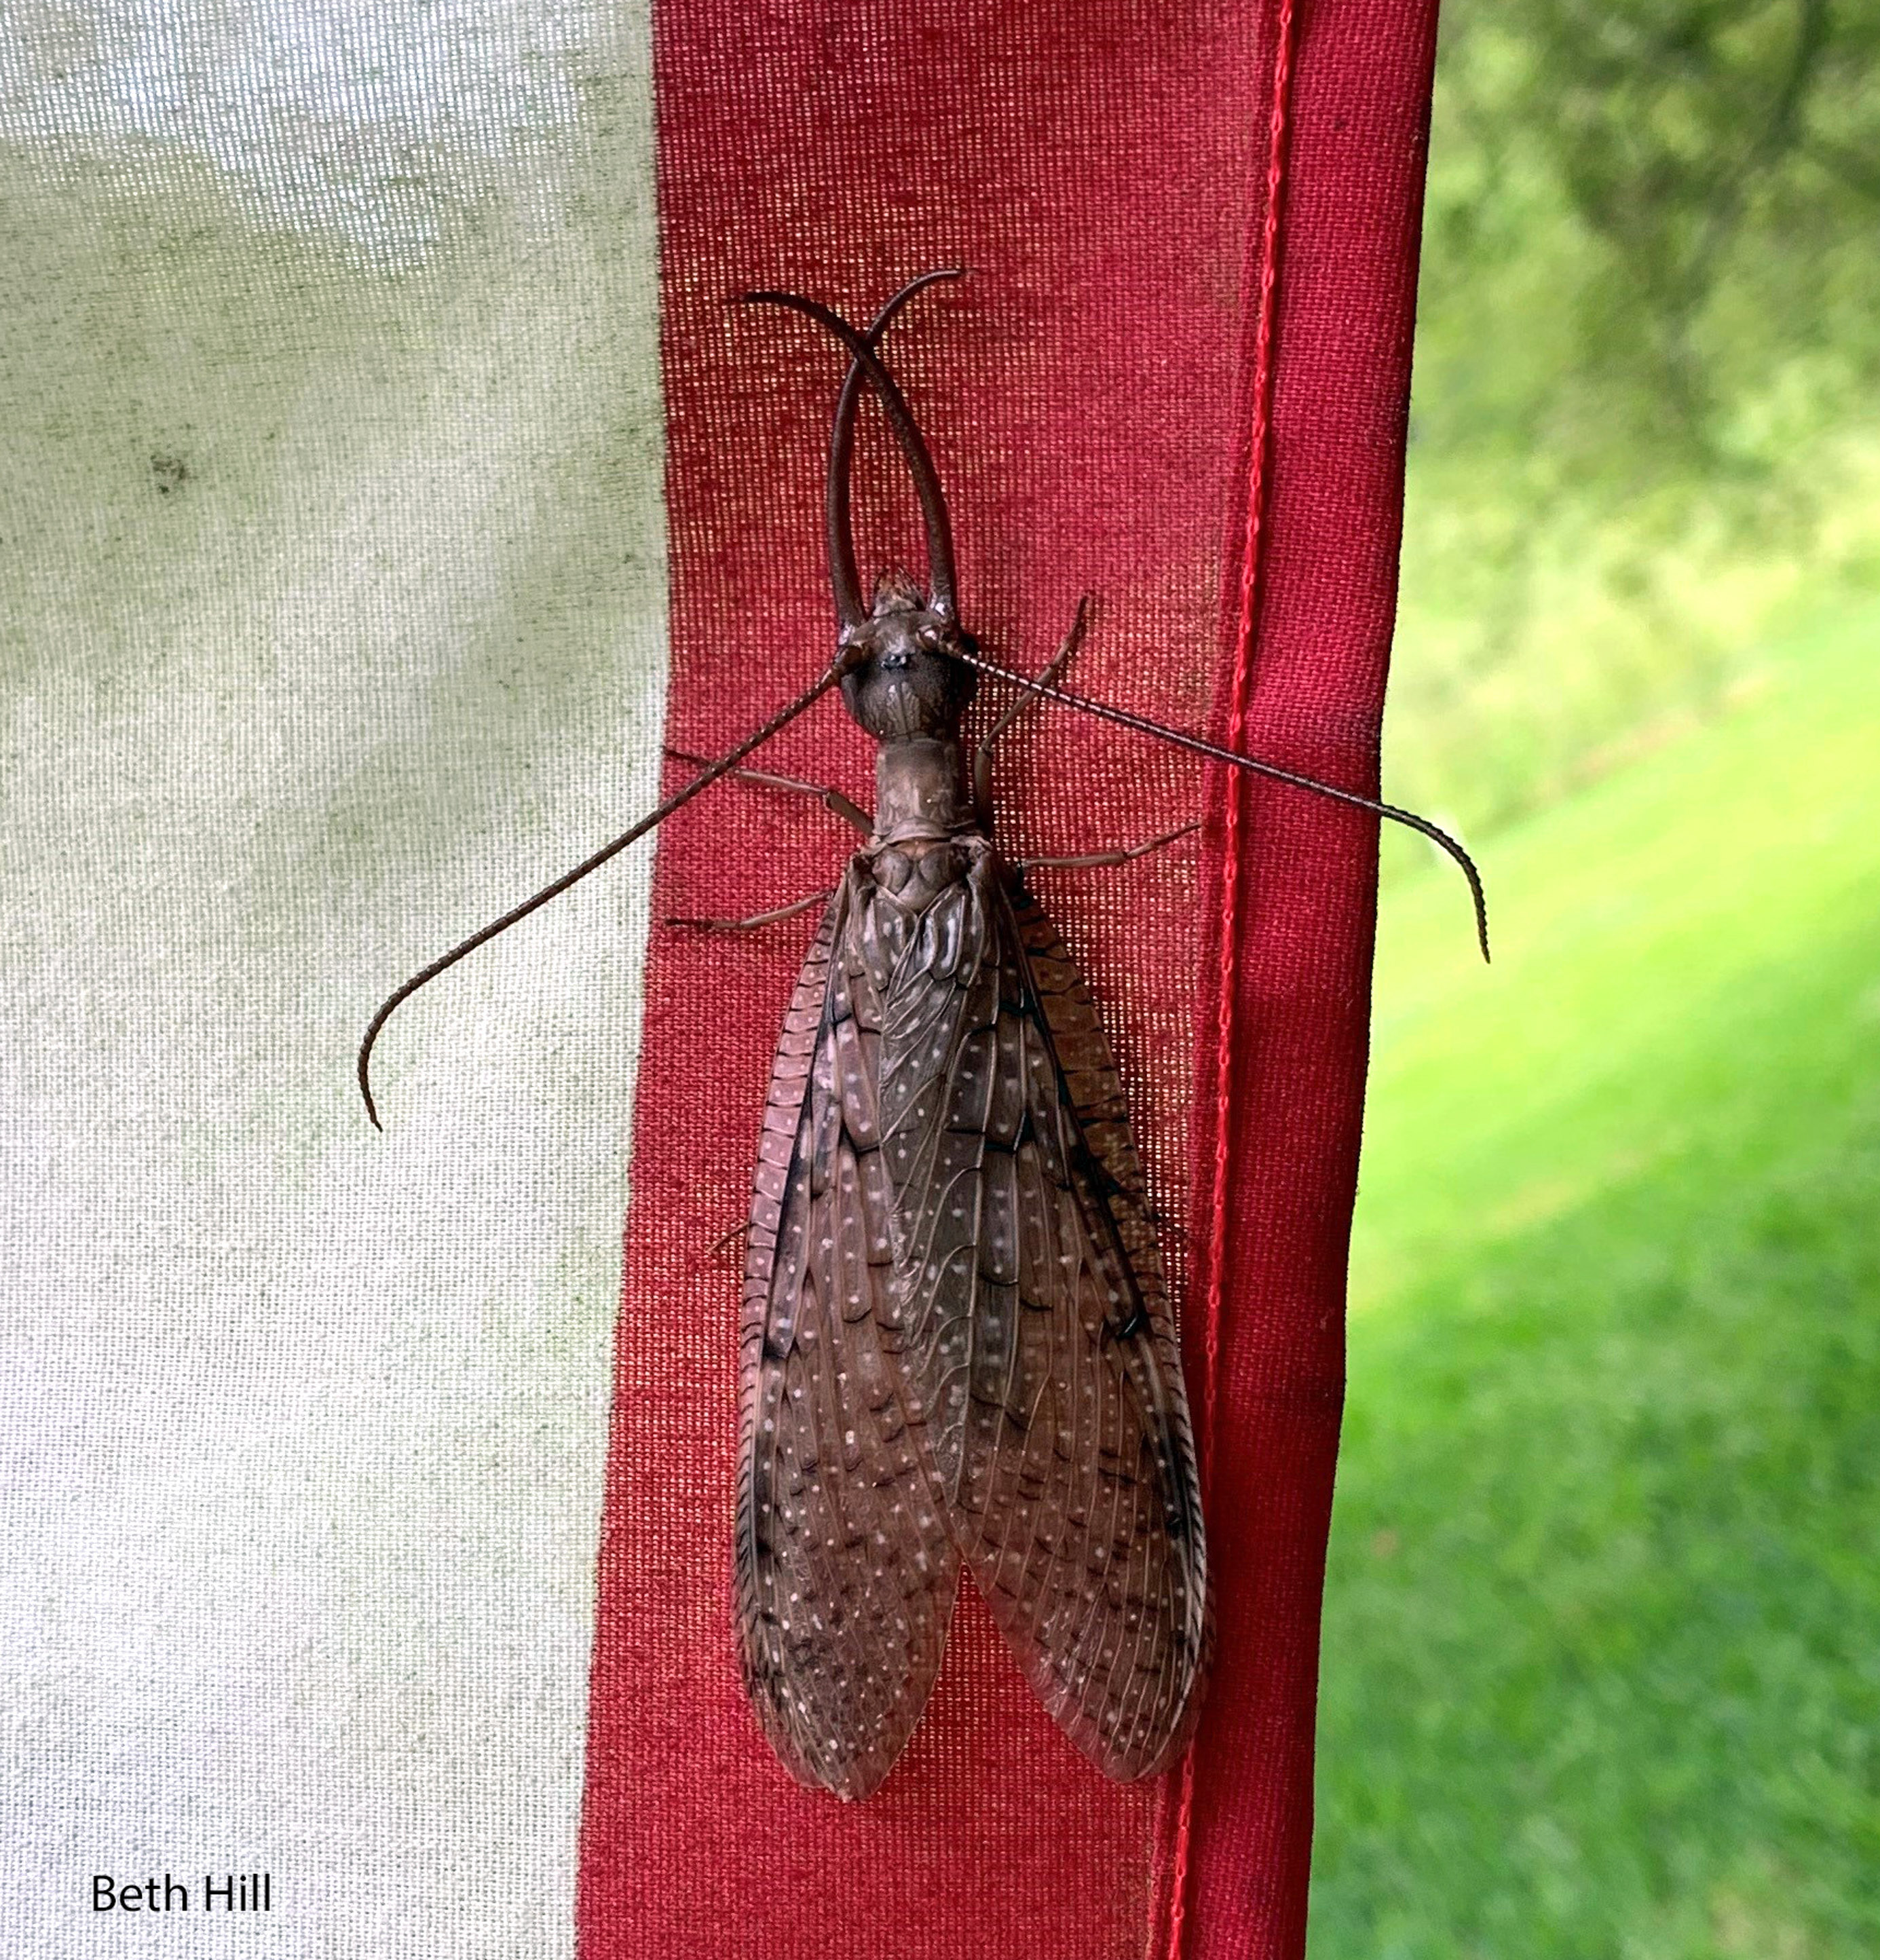 Eastern Dobsonfly Vol. 9, No. 24  Mississippi State University Extension  Service